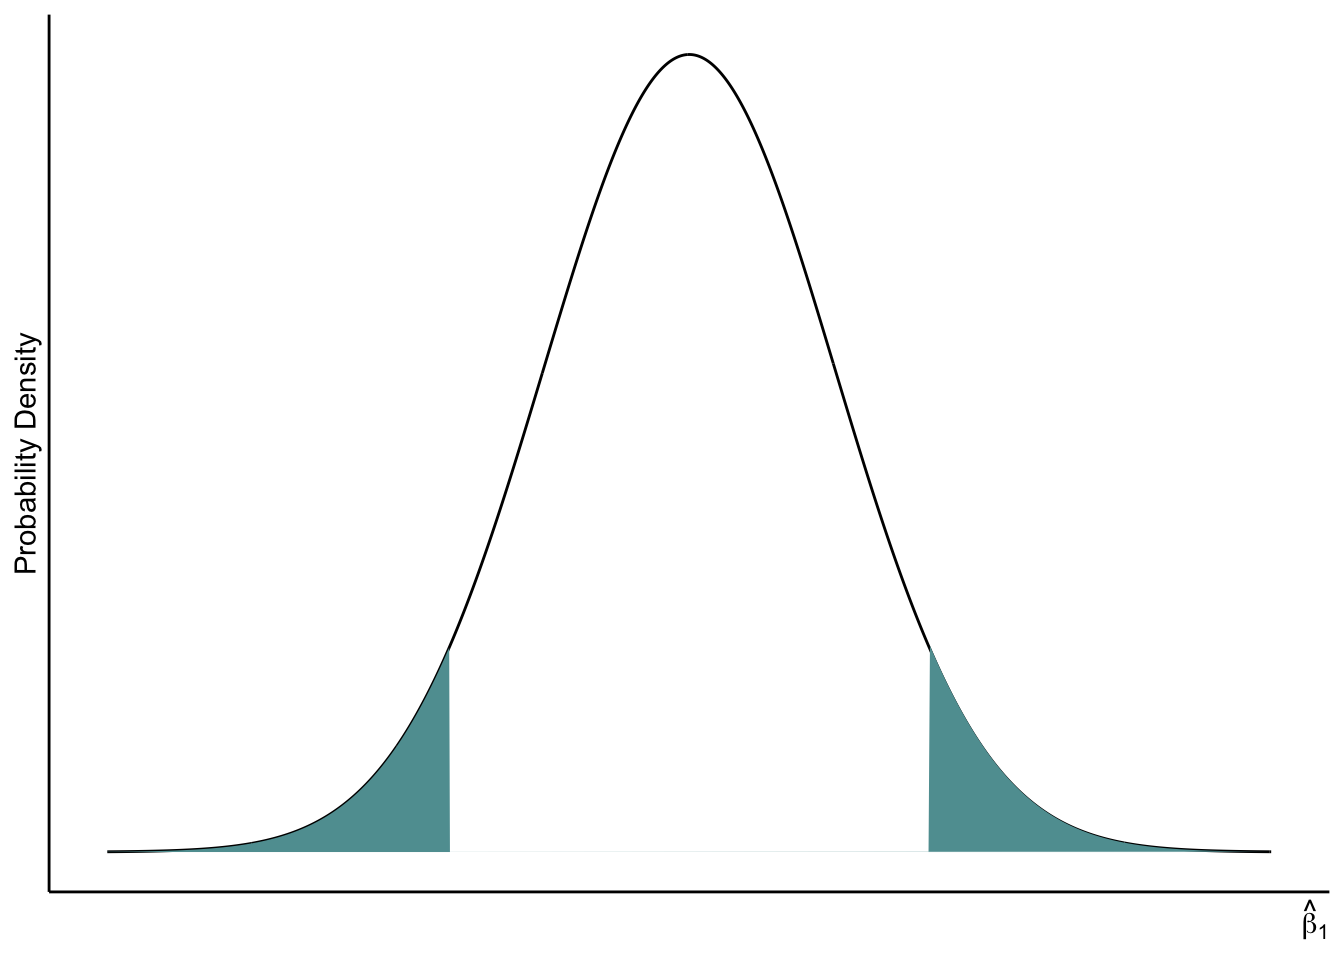 Two-tailed p-value